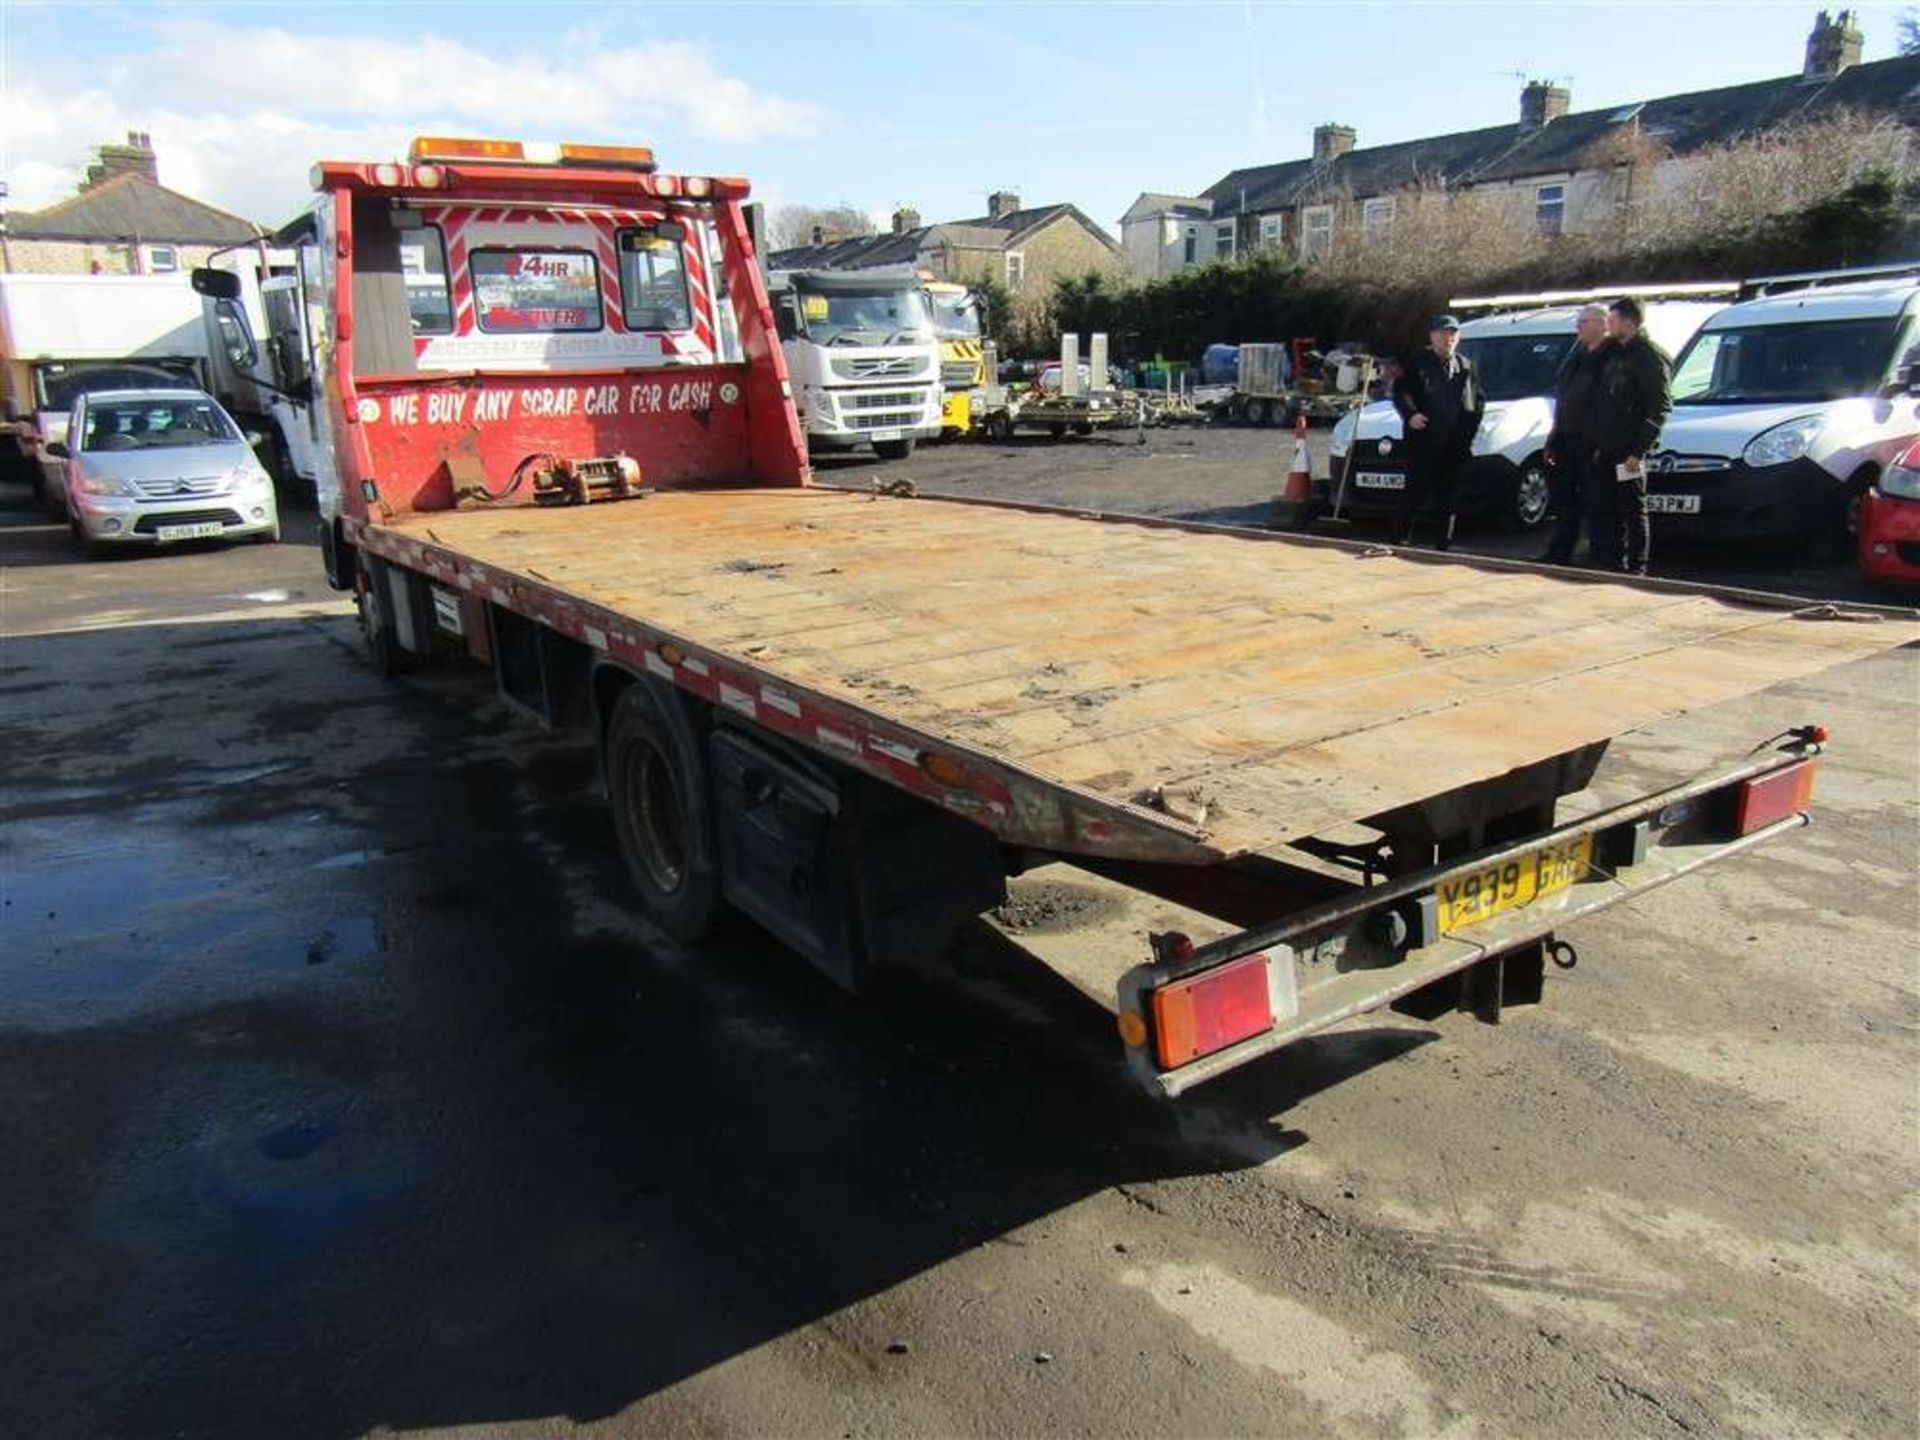 2001 Y reg Iveco Euro Cargo 7.5t Tilt / Slide Recovery Truck - Image 3 of 6